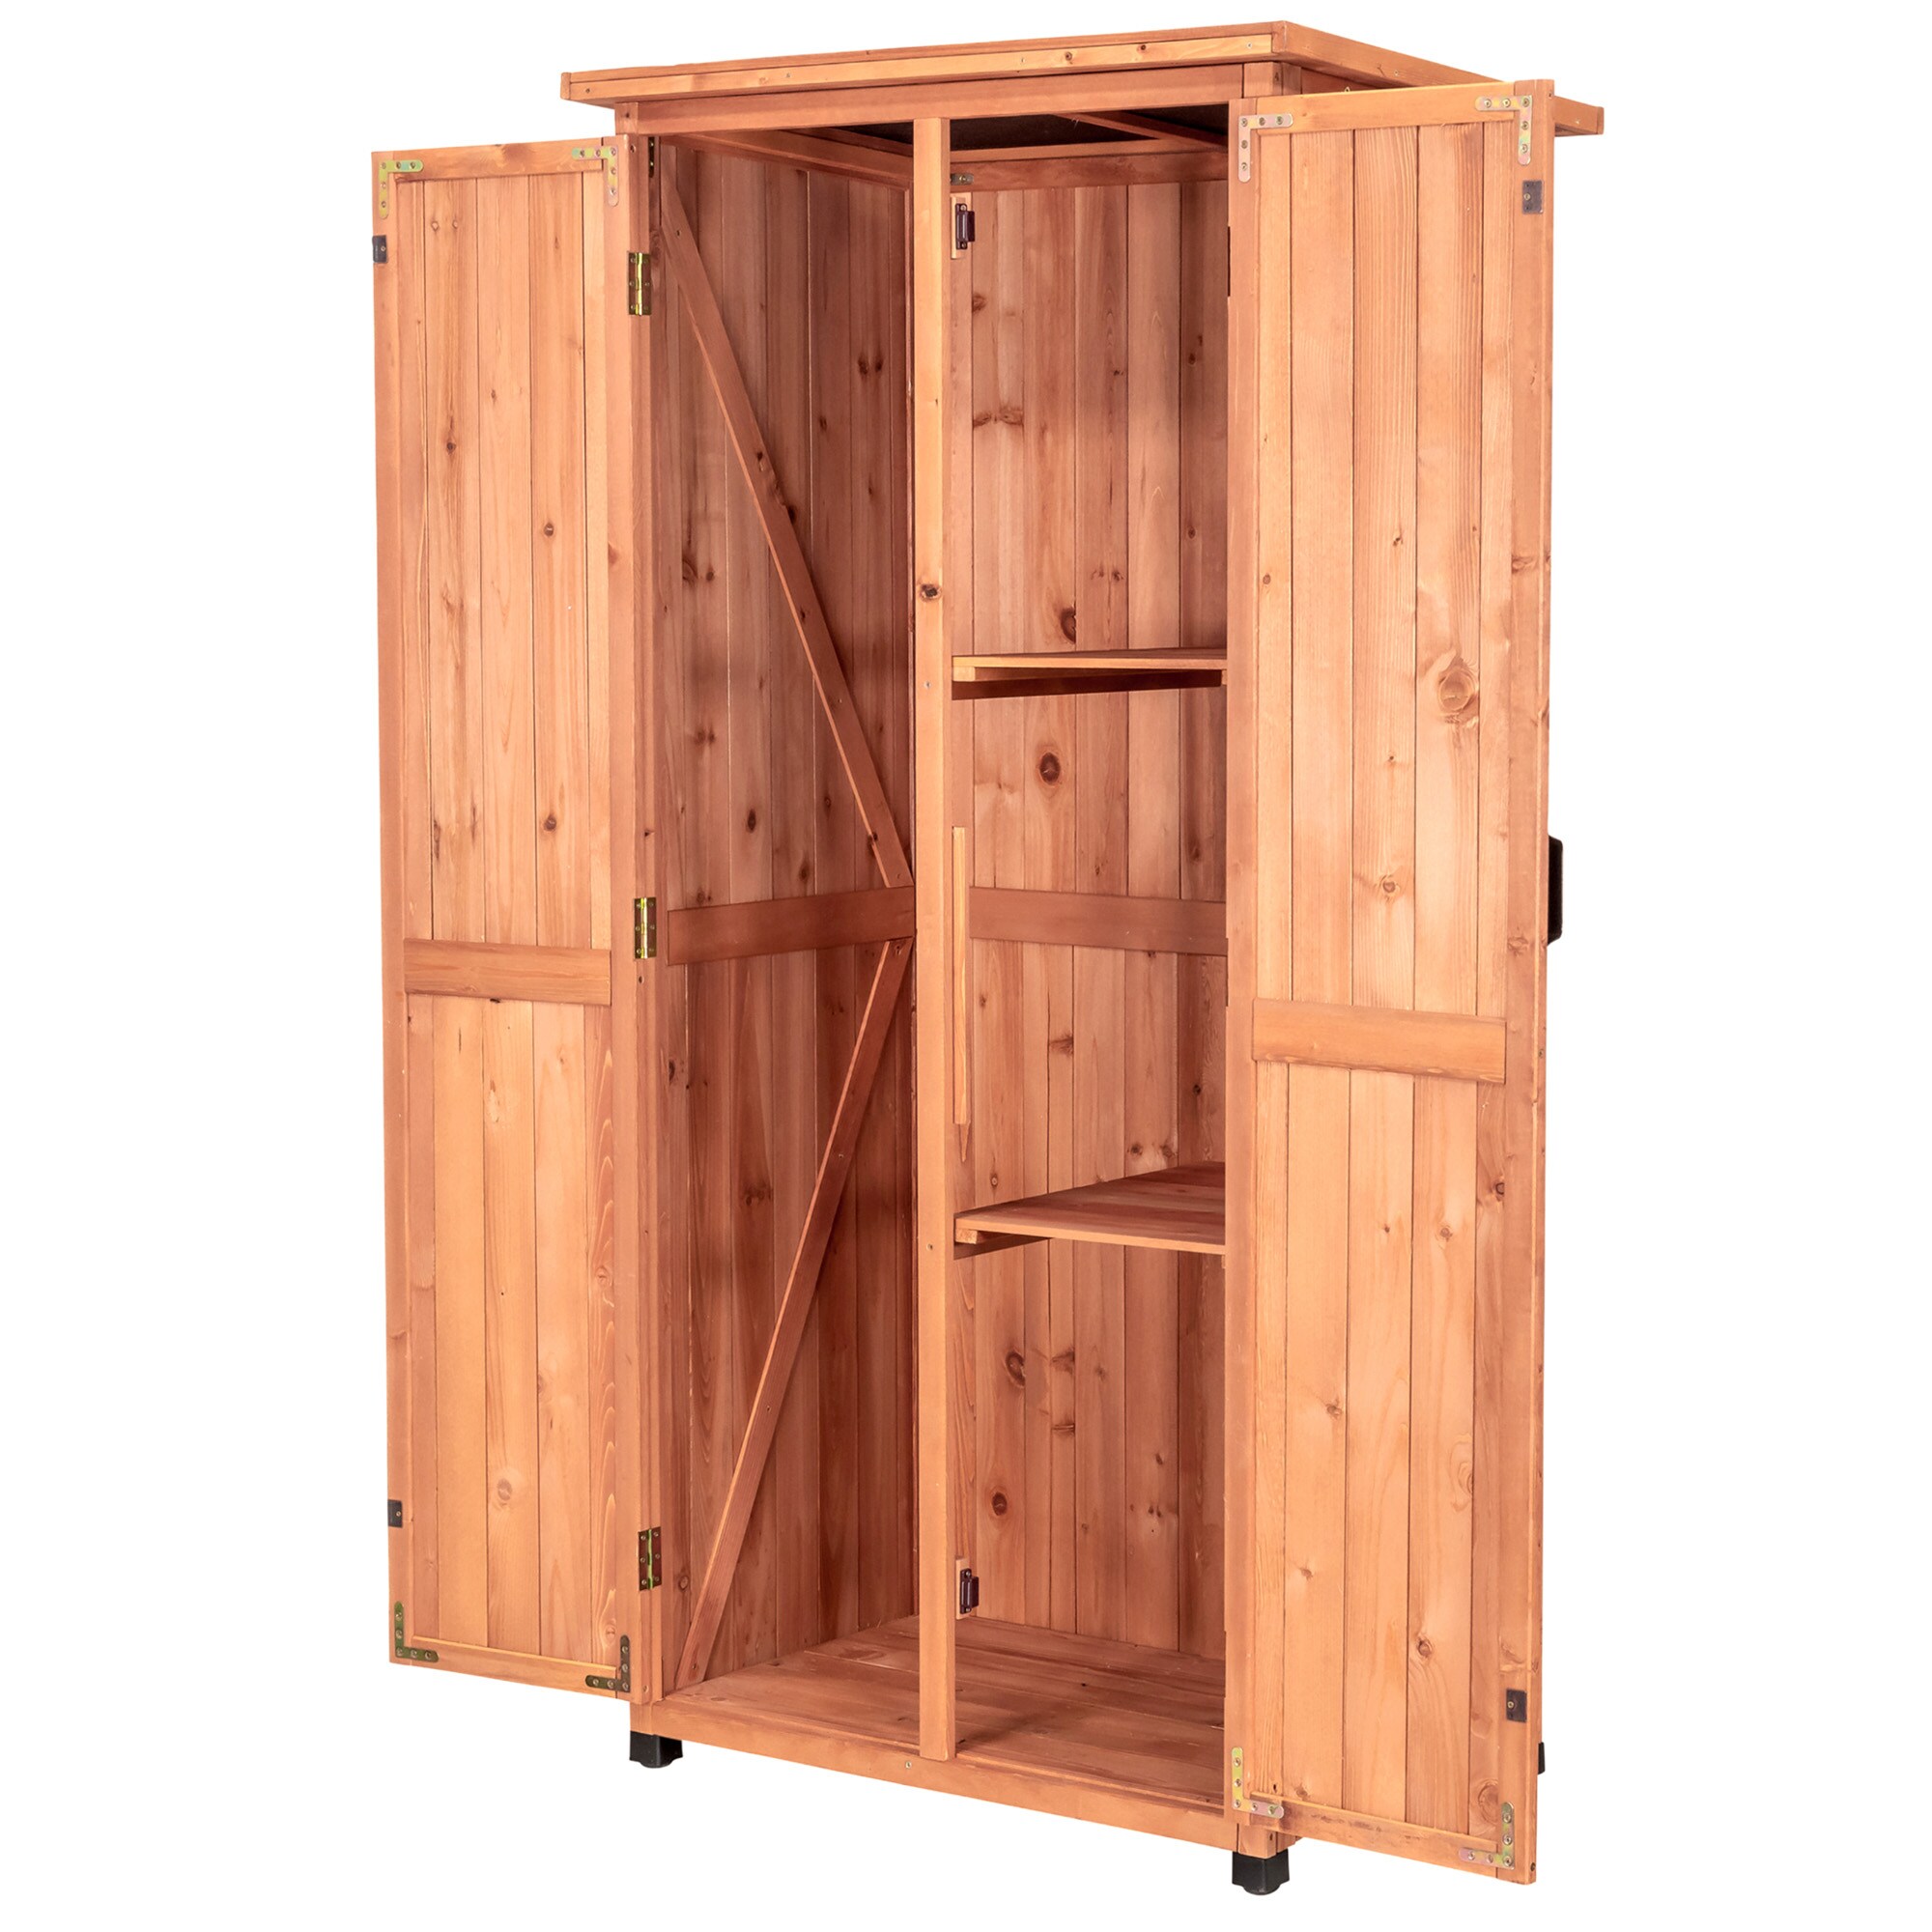 Leisure Season 5-ft x 3-ft Wood Storage Shed - Horizontal Refuse Storage  Shed, Cedar, Lean-to Style (55.0 Cu. Feet) in the Wood Storage Sheds  department at